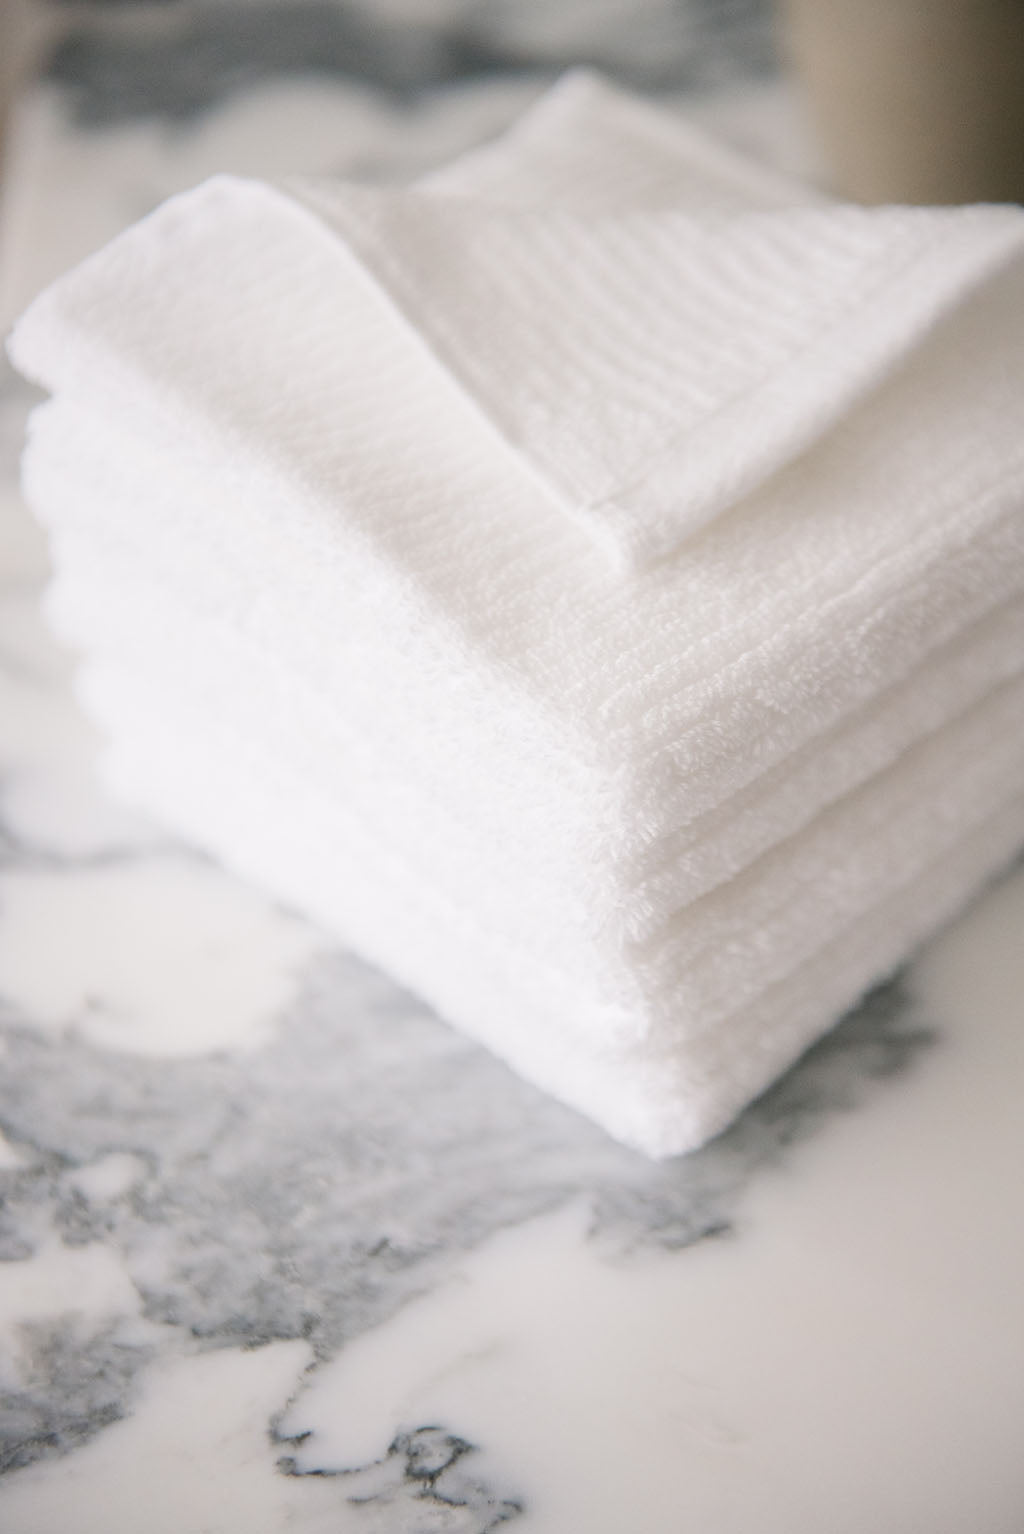 Ribbed Terry Wash Cloths in the color White. Photo of product taken on white marble sink. 